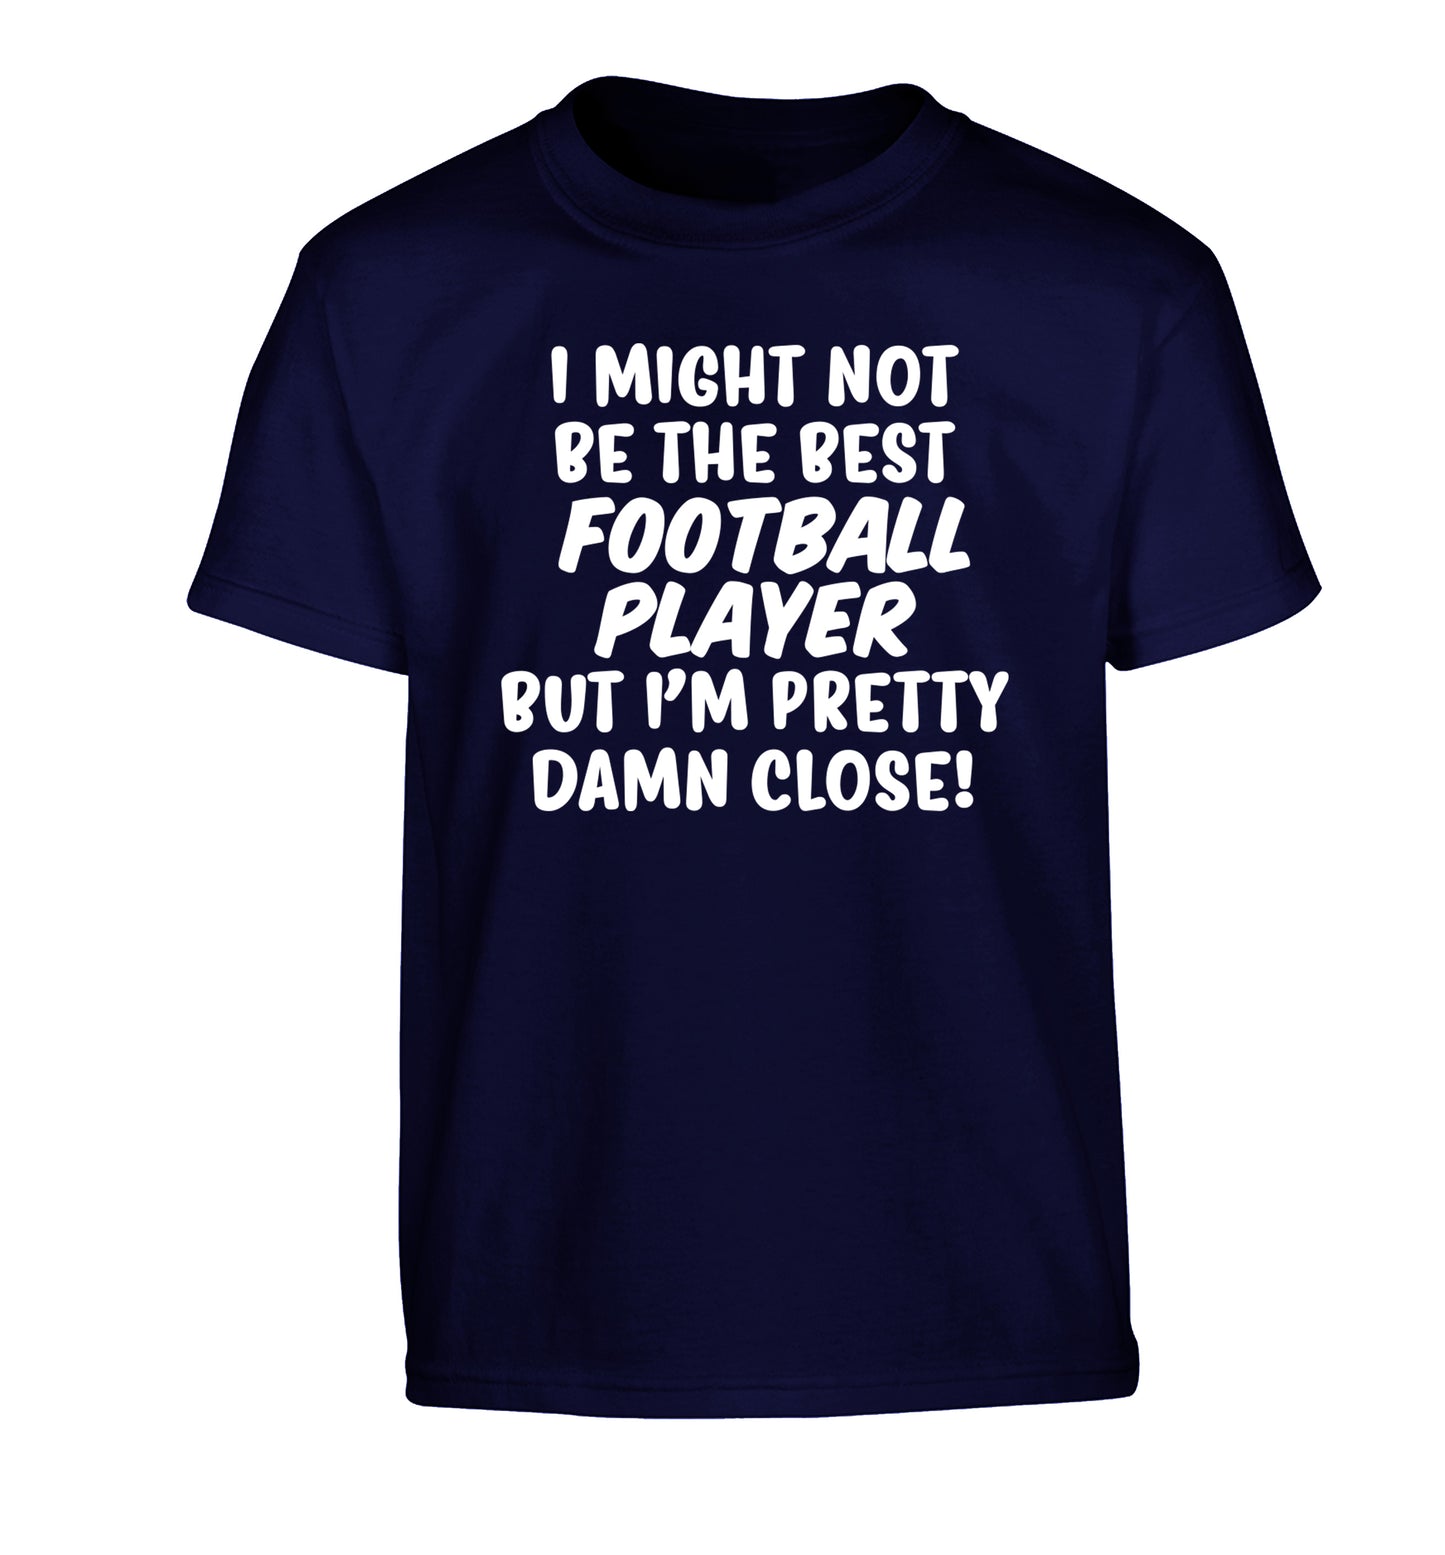 I might not be the best football player but I'm pretty close! Children's navy Tshirt 12-14 Years